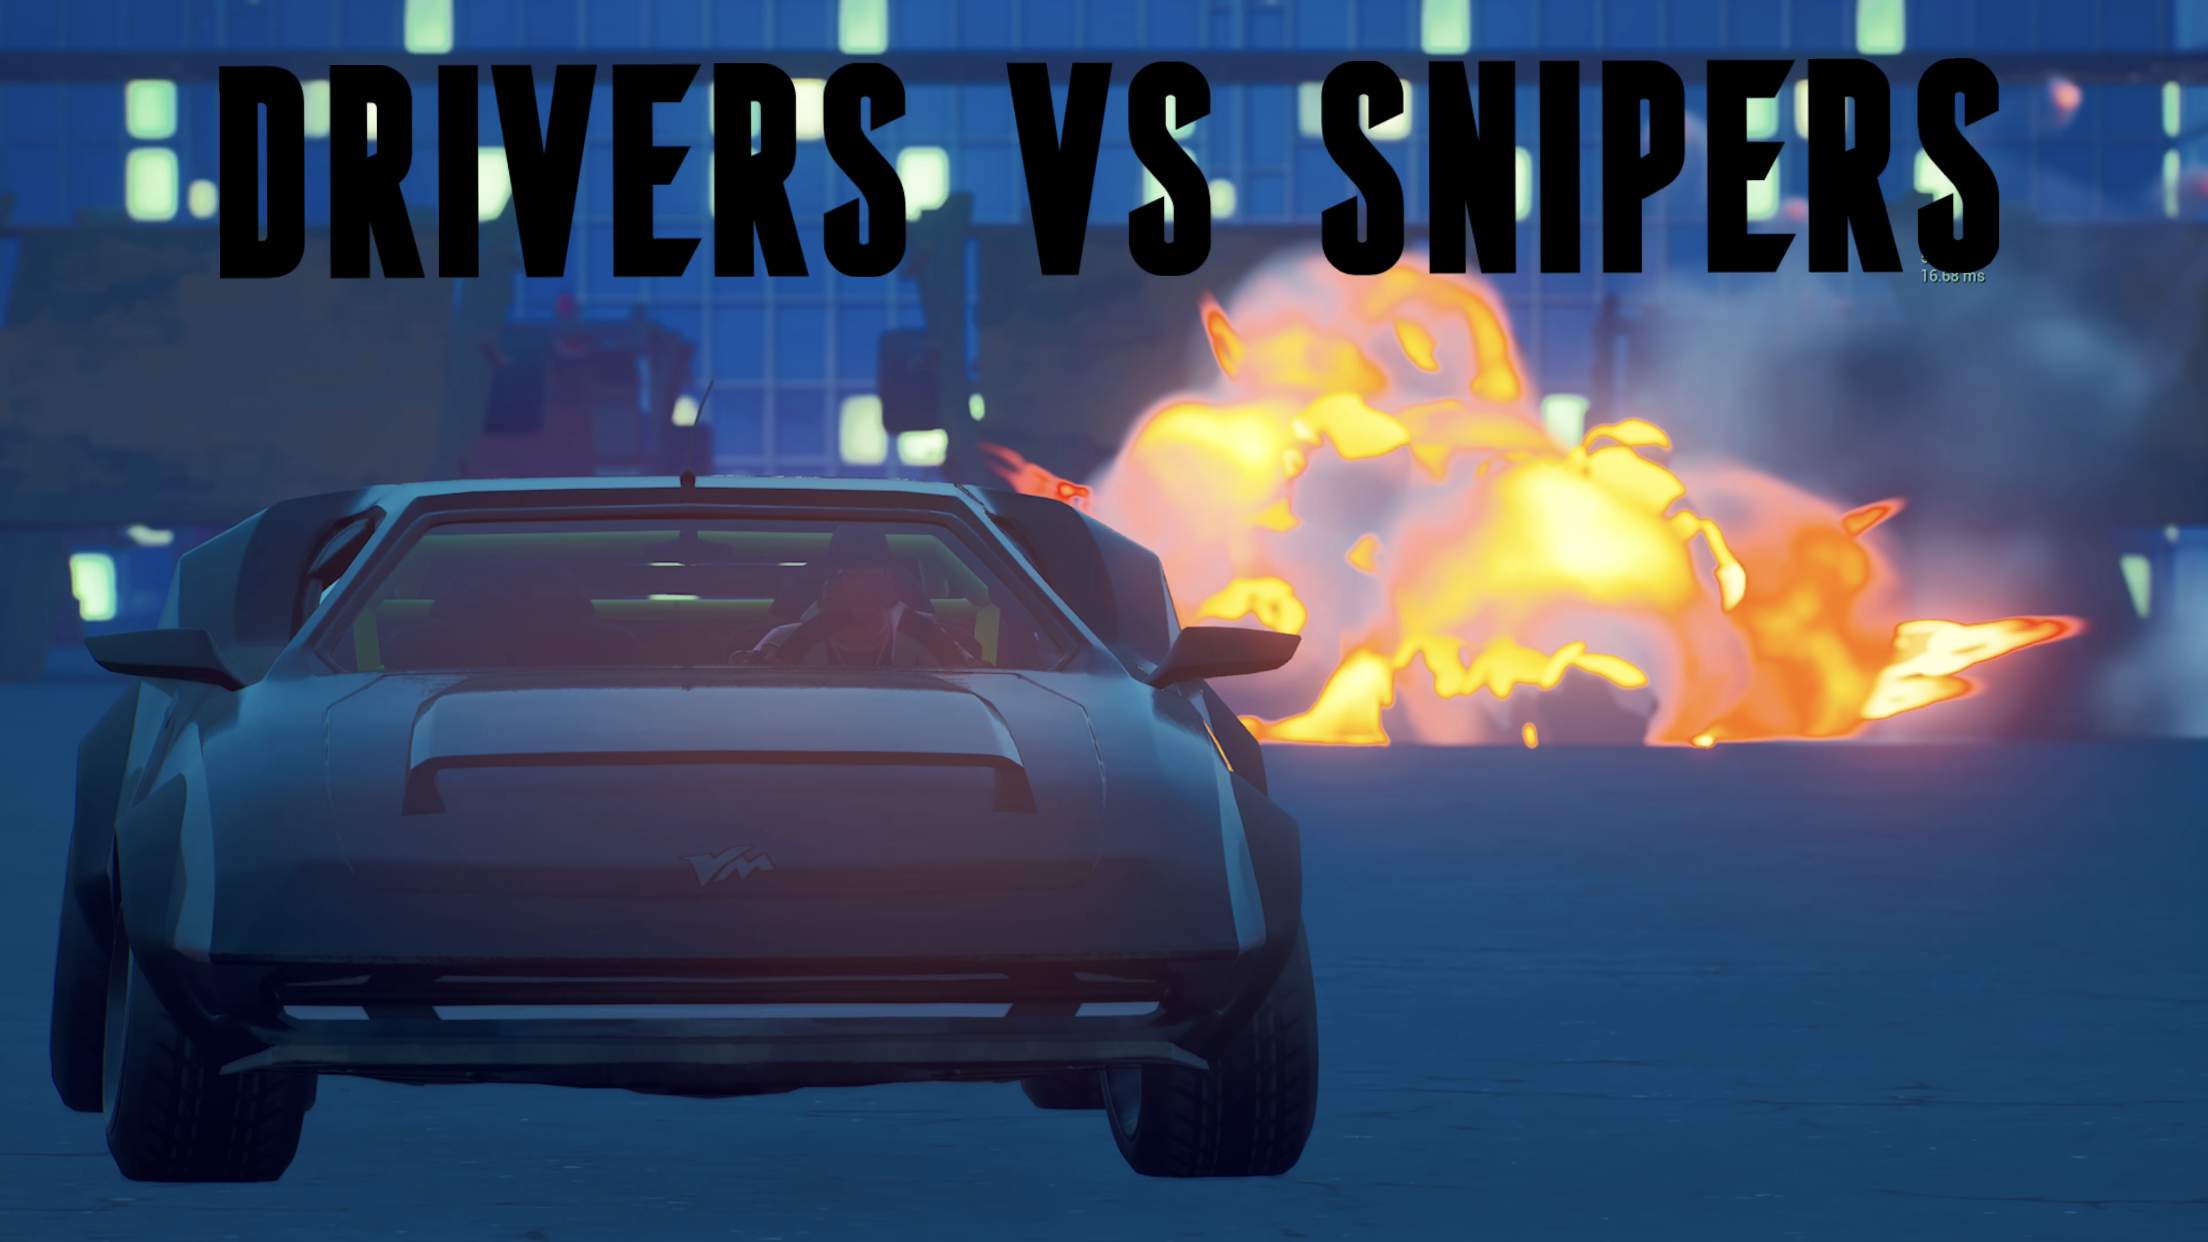 DRIVERS VS SNIPERS